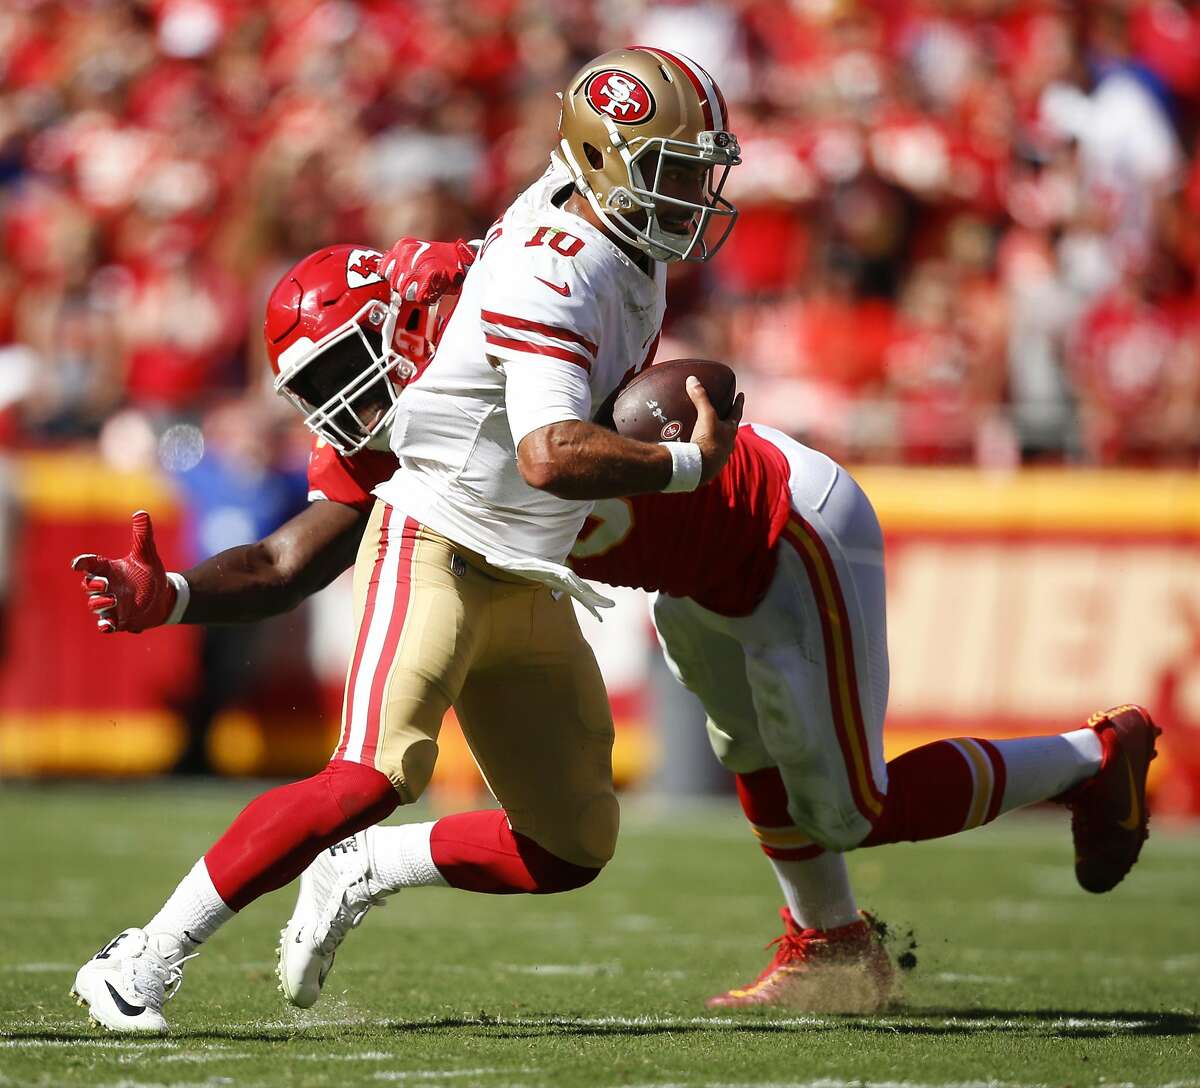 KANSAS CITY, MO - SEPTEMBER 23: Jimmy Garoppolo #10 of the San Francisco 49ers escapes a sack attempt of Justin Houston #50 of the Kansas City Chiefs during the fourth quarter of the game at Arrowhead Stadium on September 23rd, 2018 in Kansas City, Missouri. (Photo by David Eulitt/Getty Images)